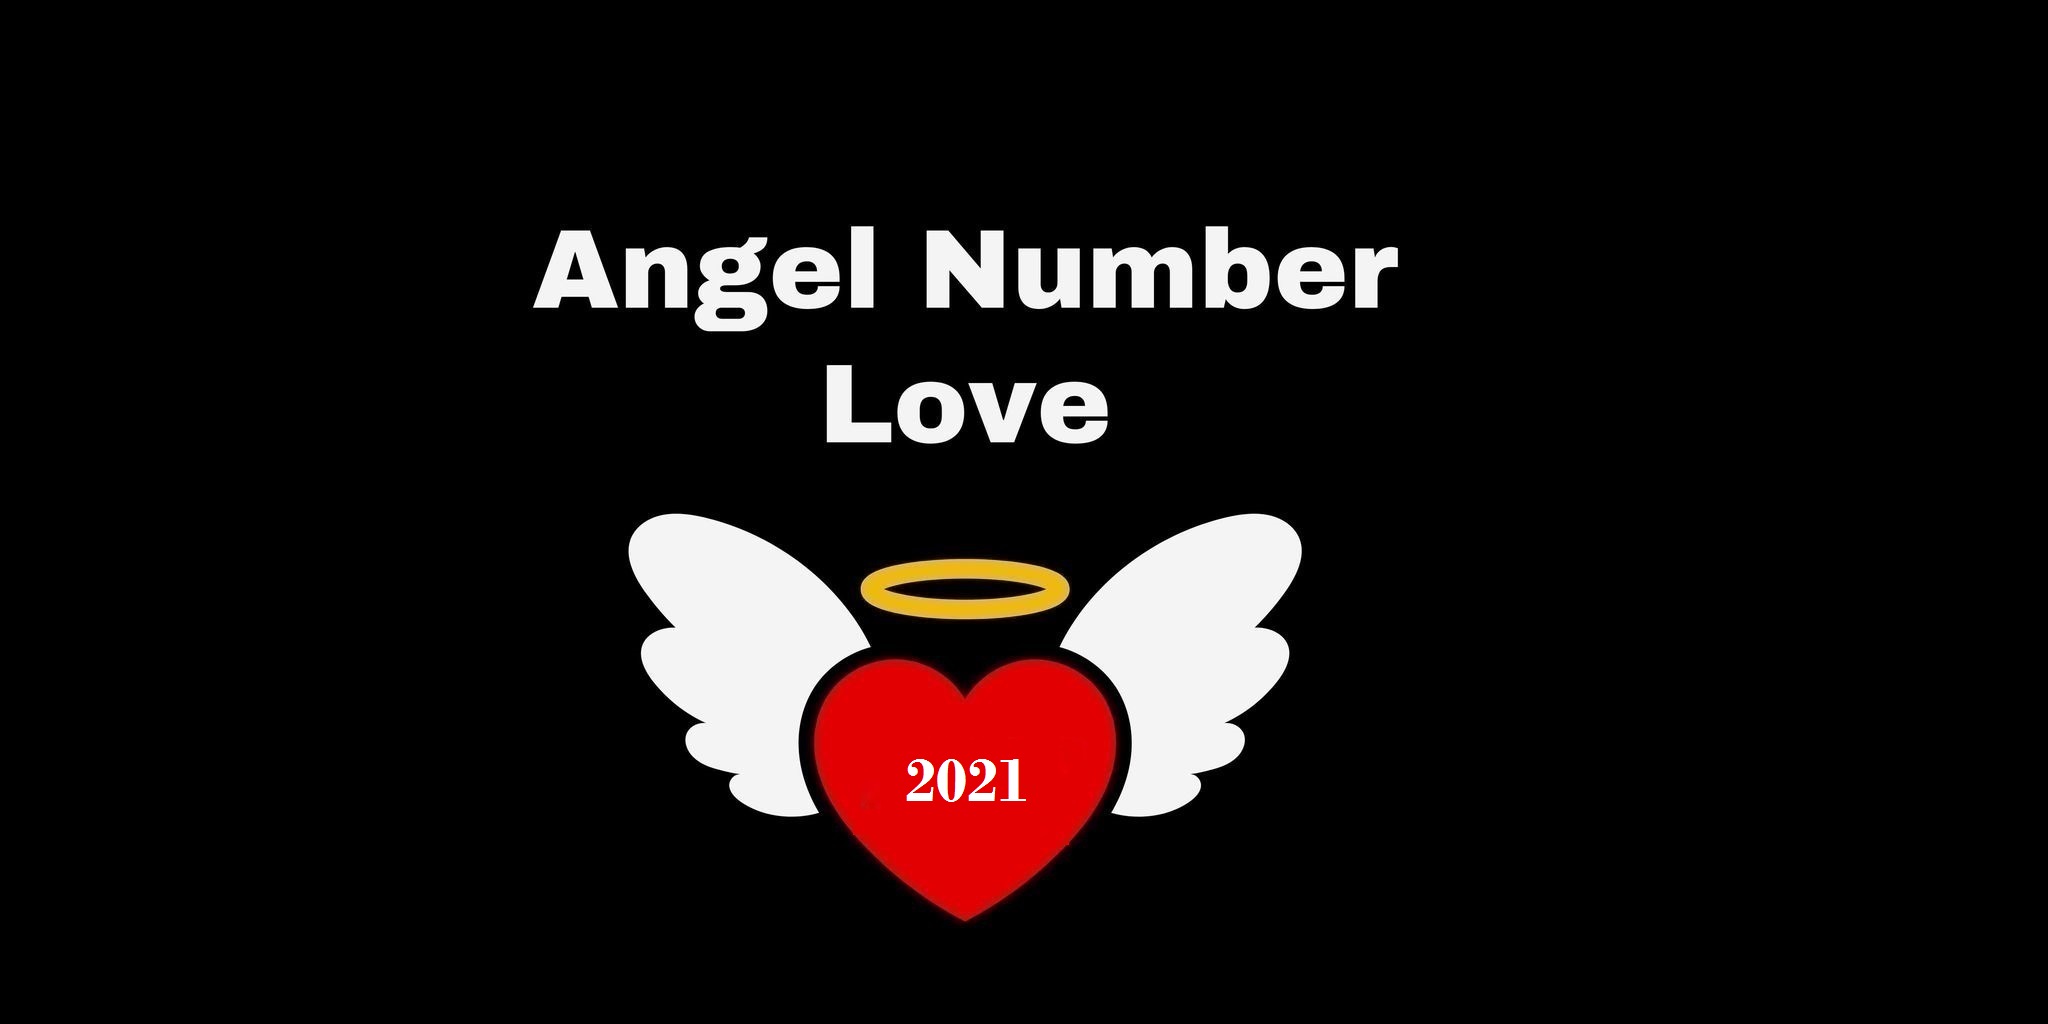 2021 Angel Number Meaning In Love